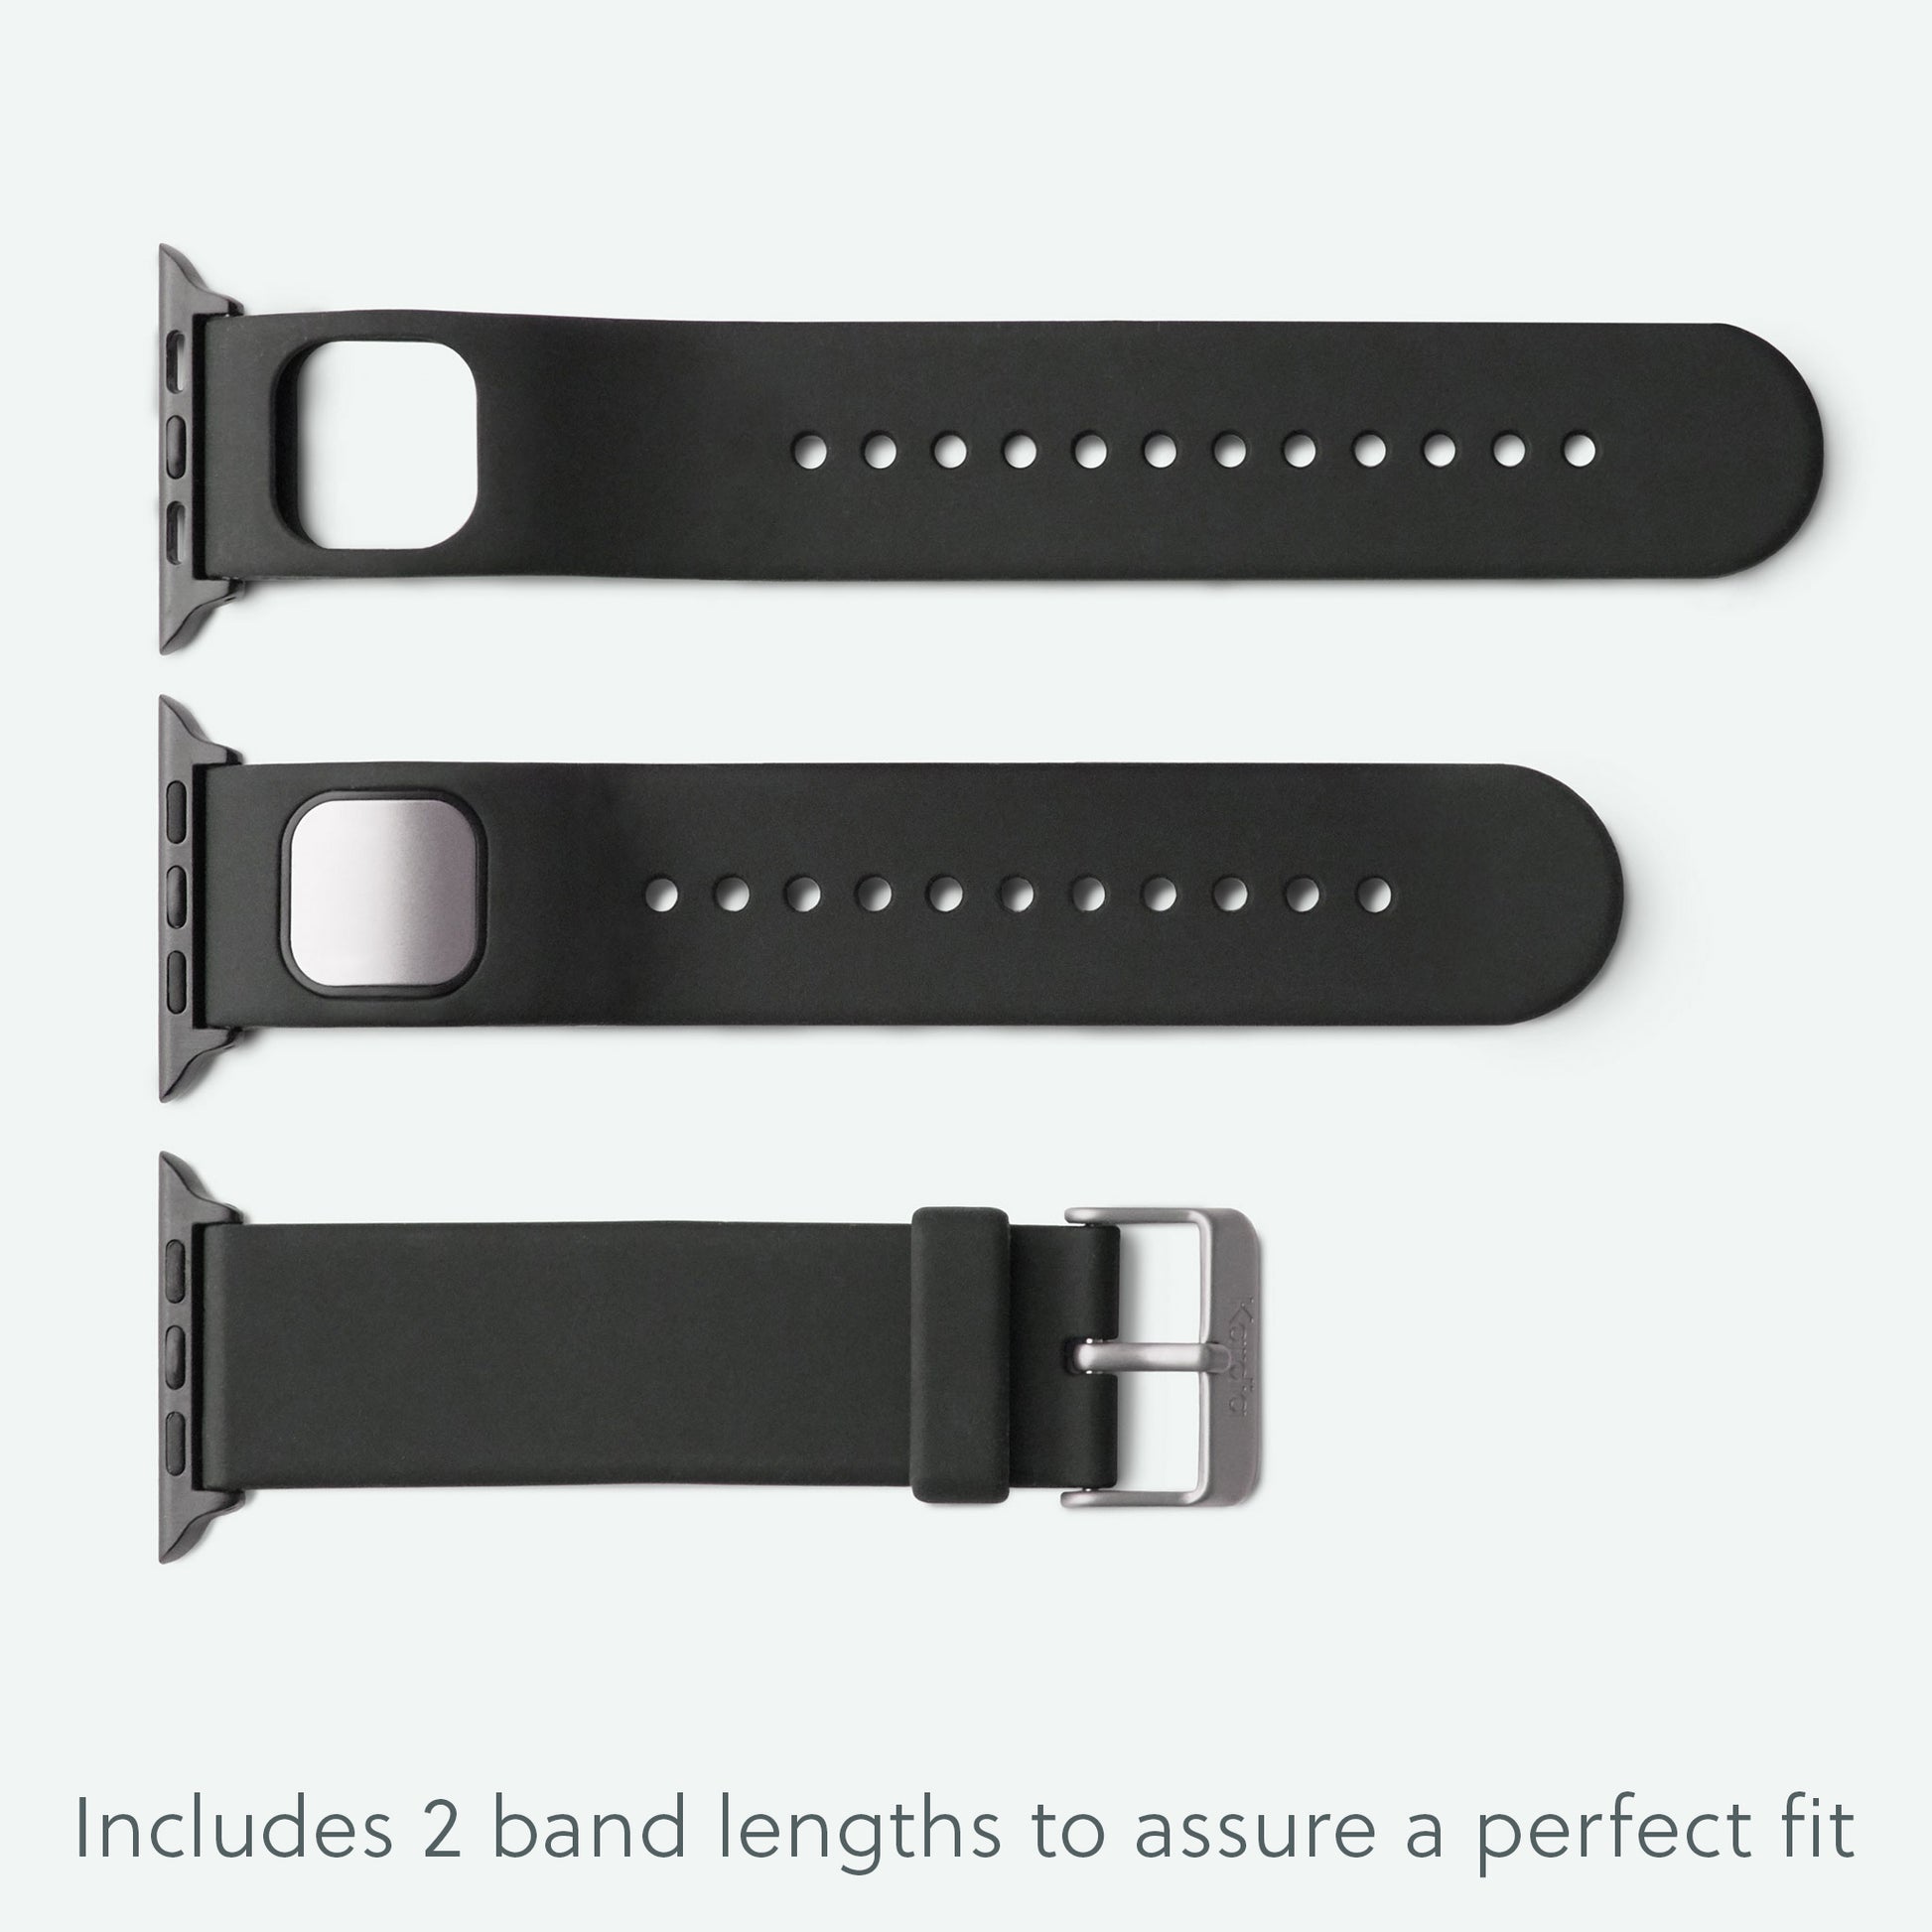 Kardia Band includes 2 different lengths to assure a perfect fit